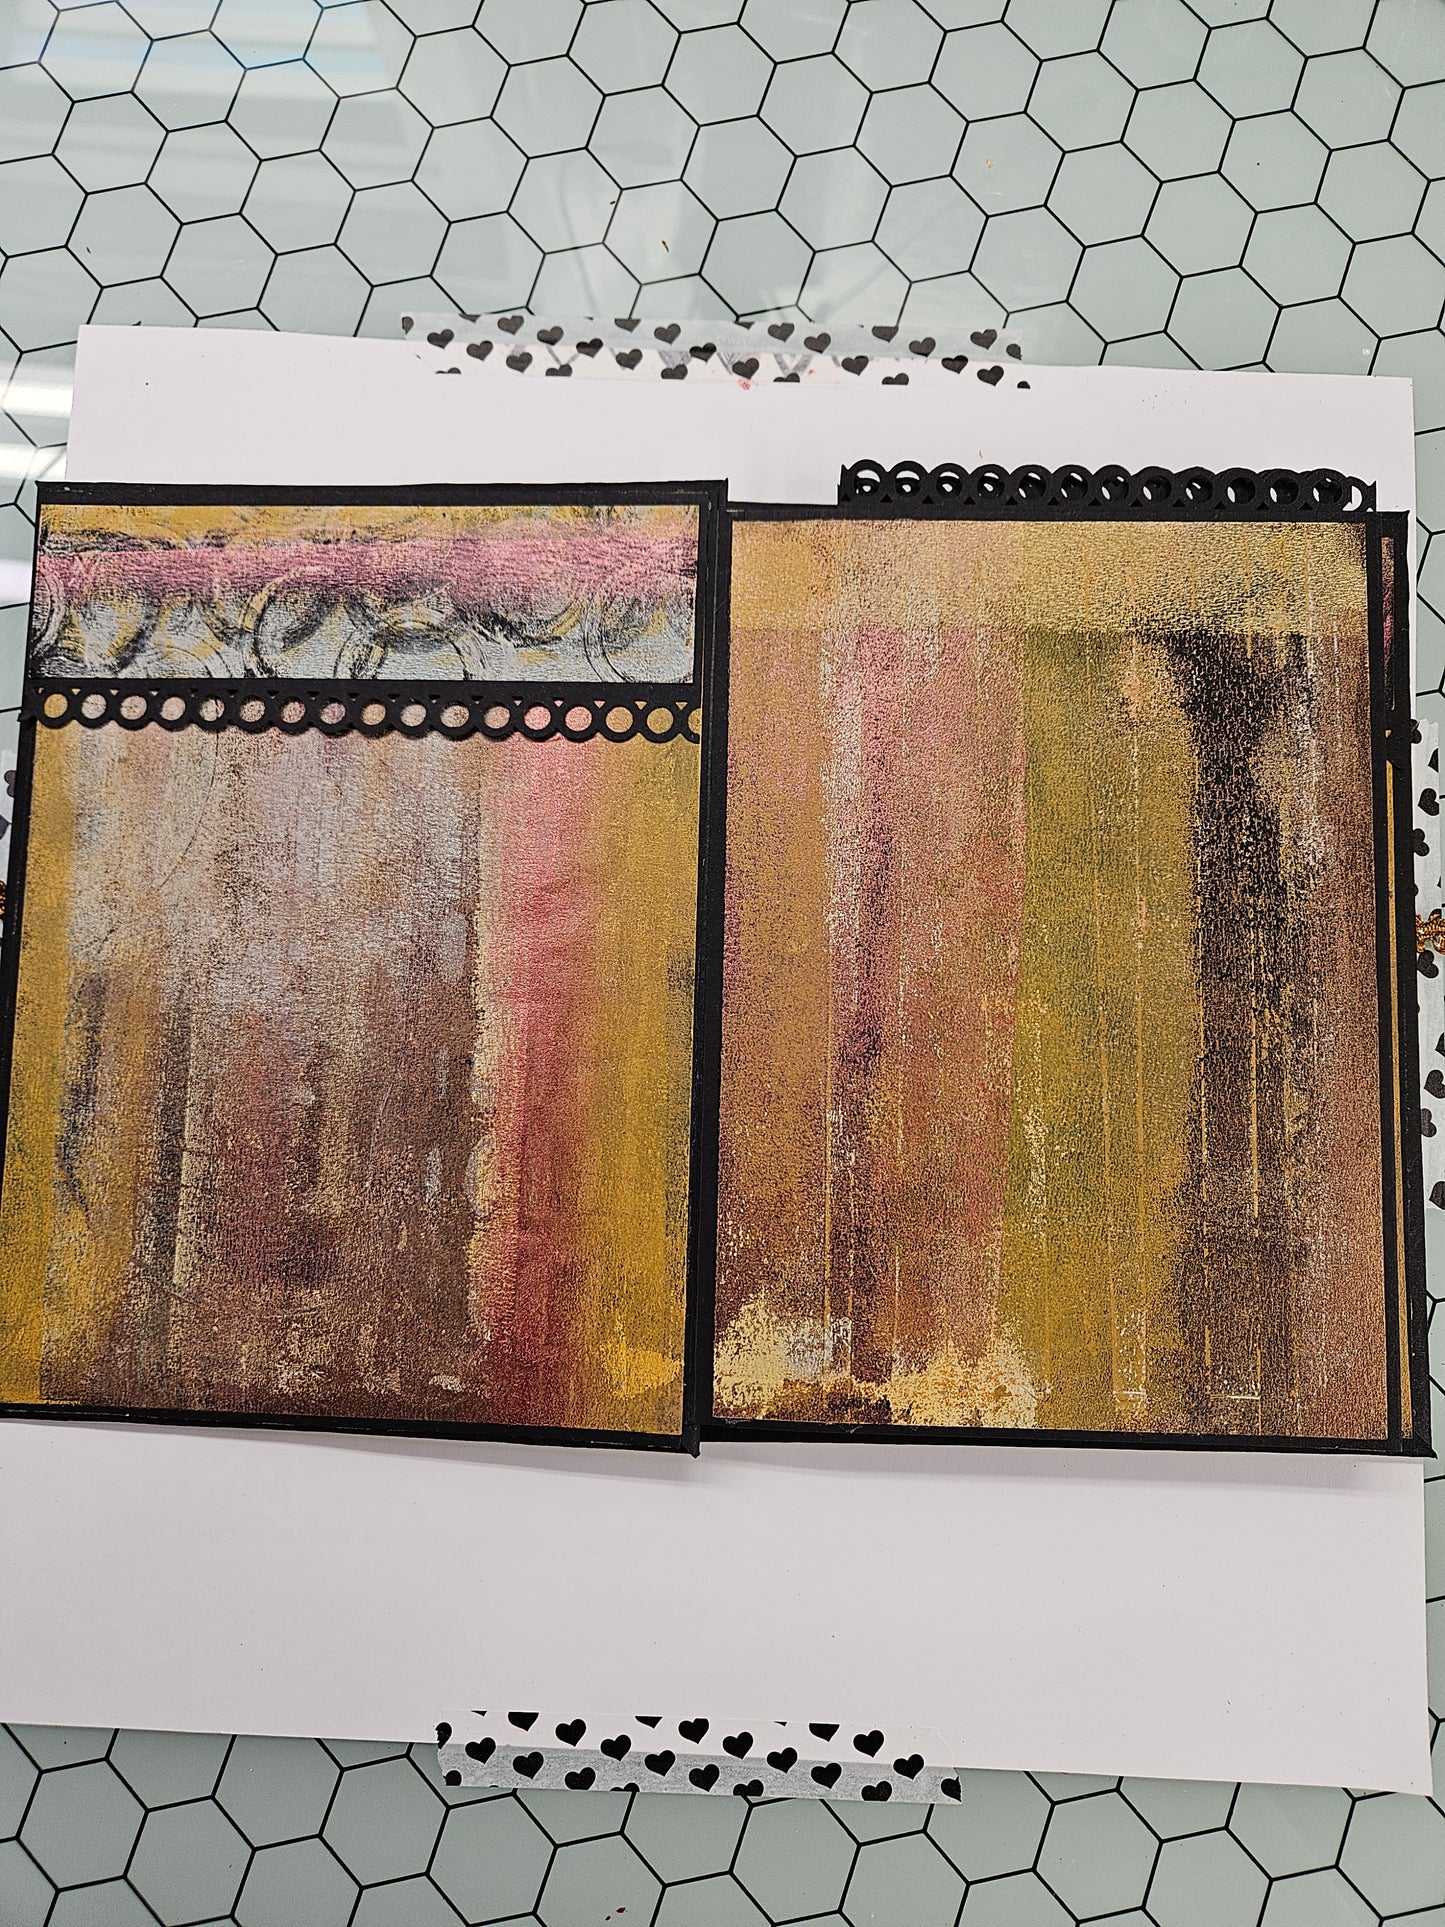 Hand-Painted Album in Shades of Brown. Gold, Rose Gold and Black: 6"x8": Multi-Media Painted Pages, Accordion Binding, Tie Closure